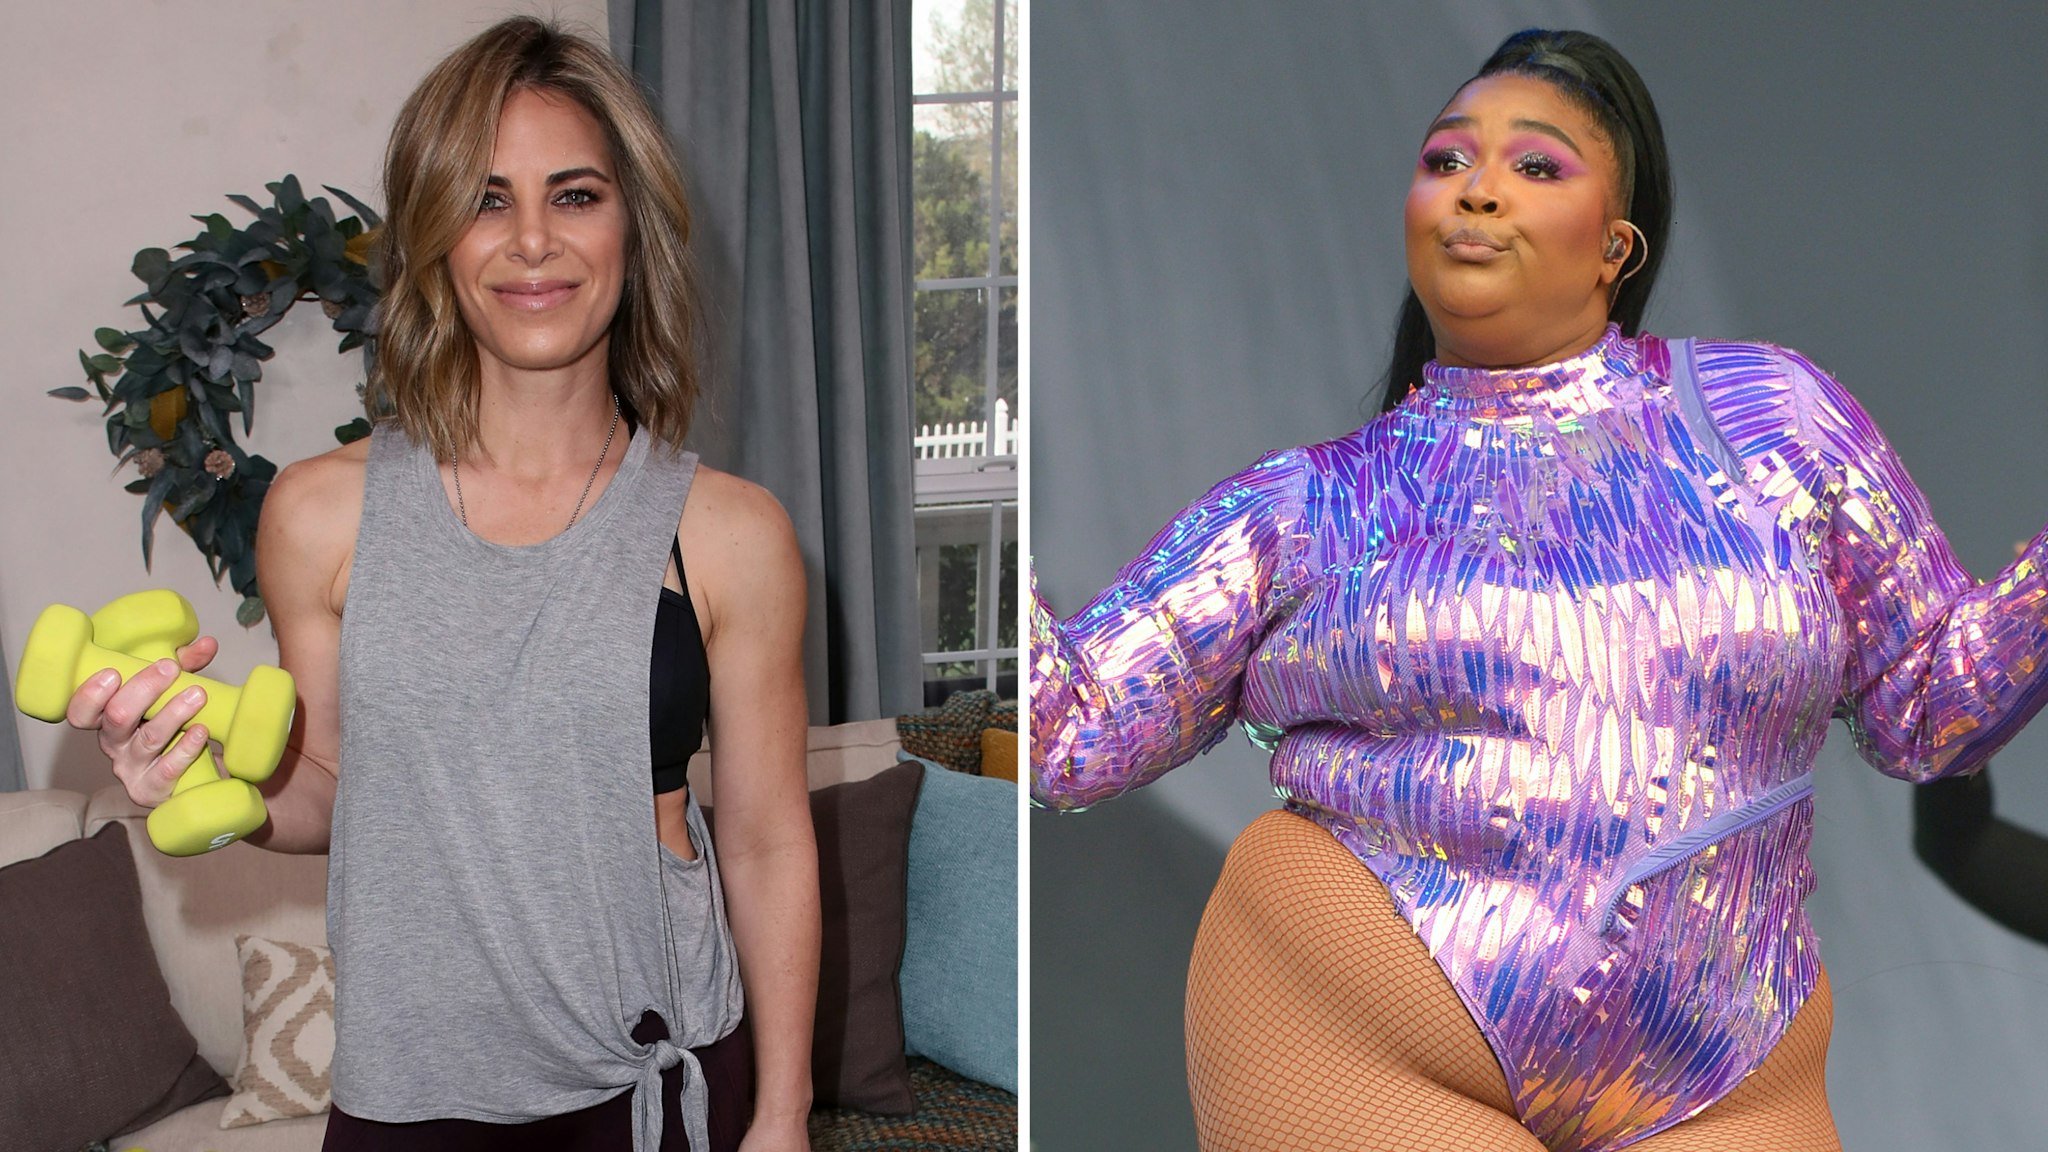 TV personality/personal trainer Jillian Michaels visits Hallmark's "Home & Family" at Universal Studios Hollywood on January 16, 2018 in Universal City, California/Lizzo performs on the West Holts stage during day four of Glastonbury Festival at Worthy Farm, Pilton on June 29, 2019 in Glastonbury, England.